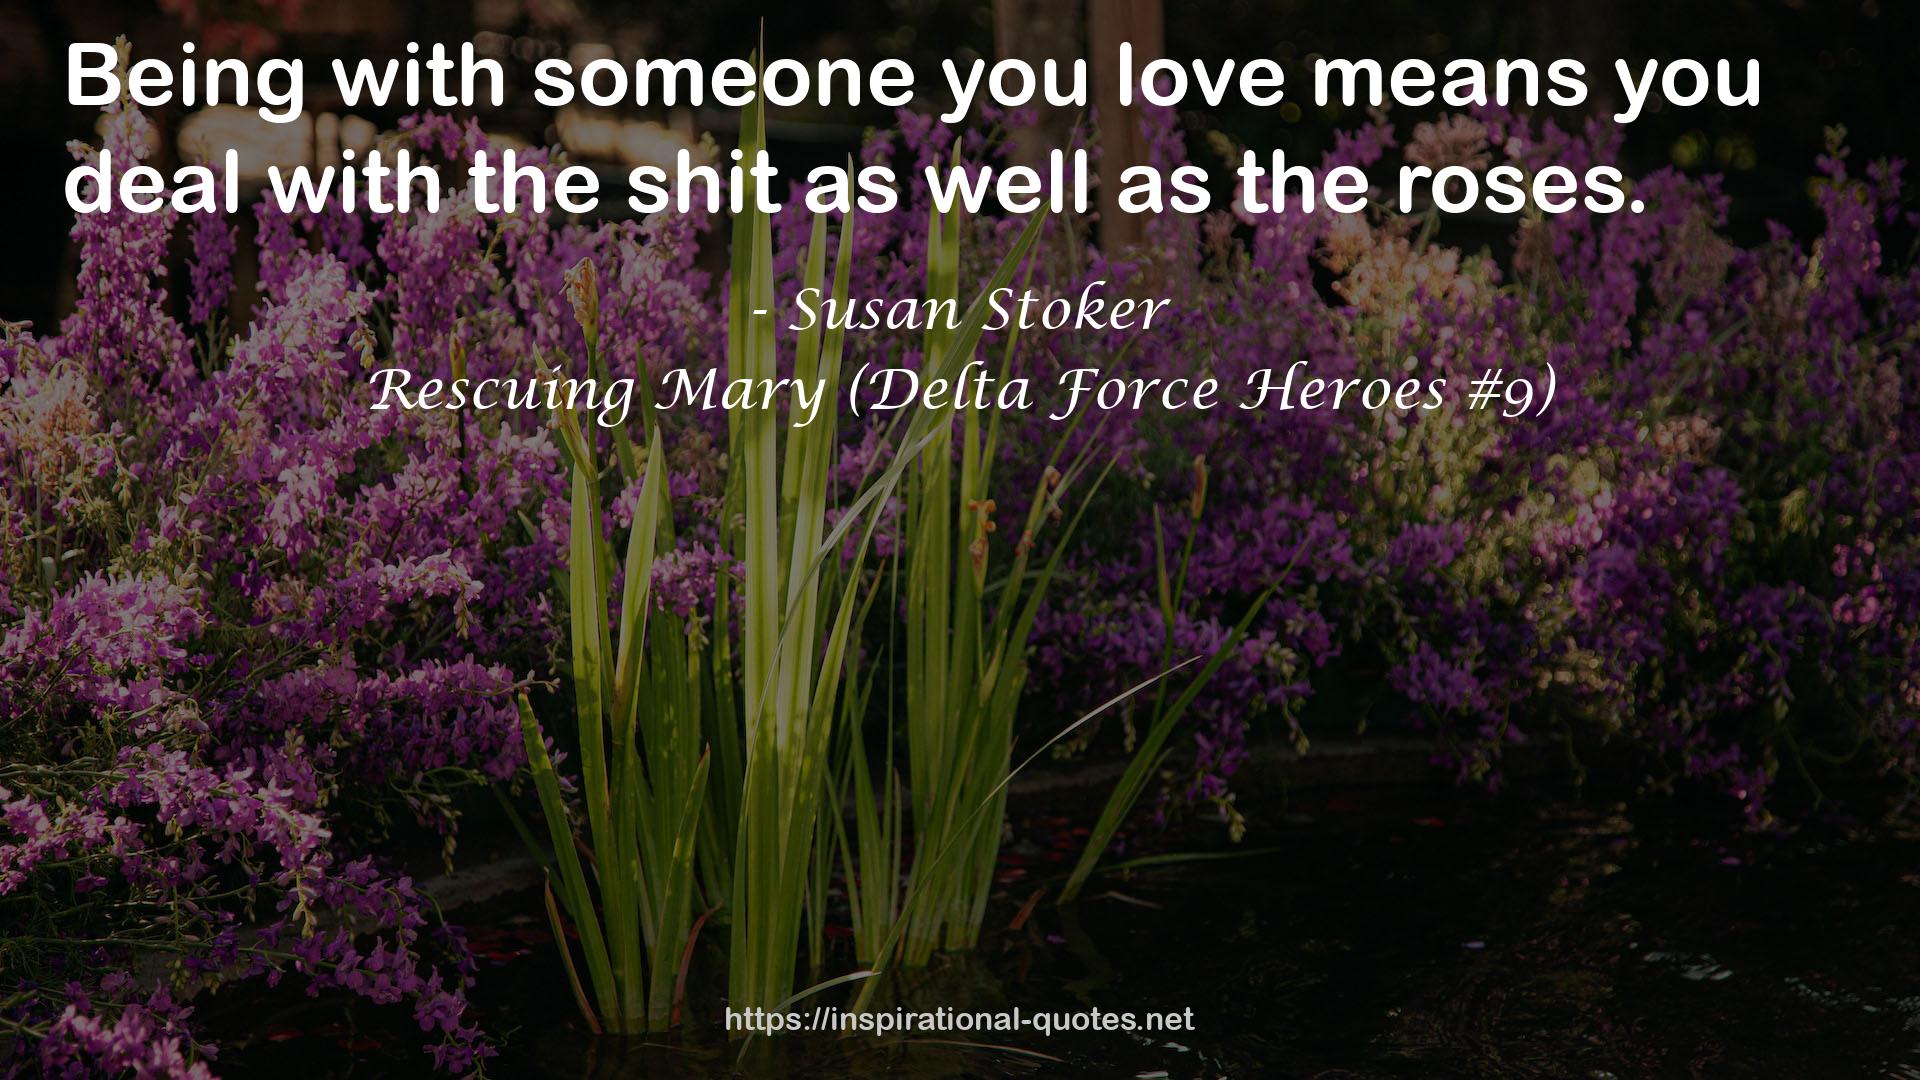 Rescuing Mary (Delta Force Heroes #9) QUOTES